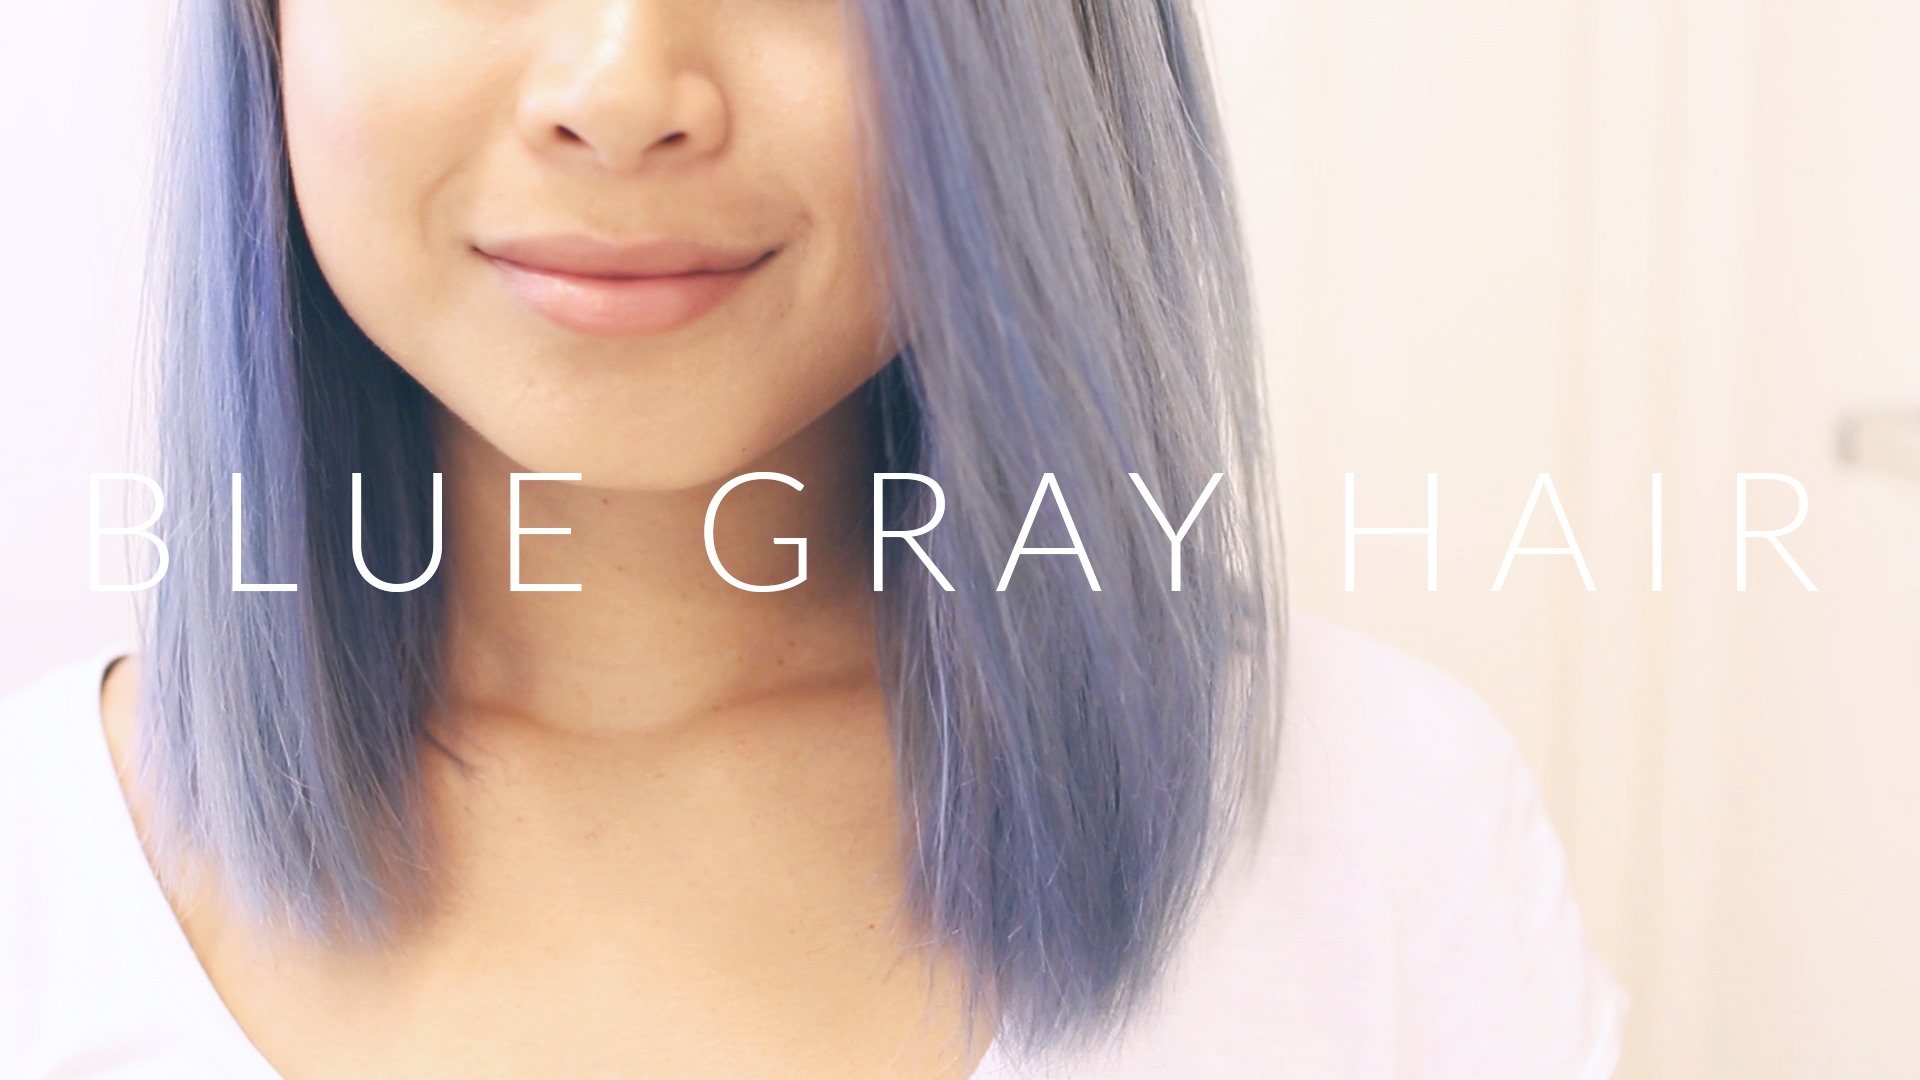 1. How to Get Blue Gray Hair Naturally - wide 1